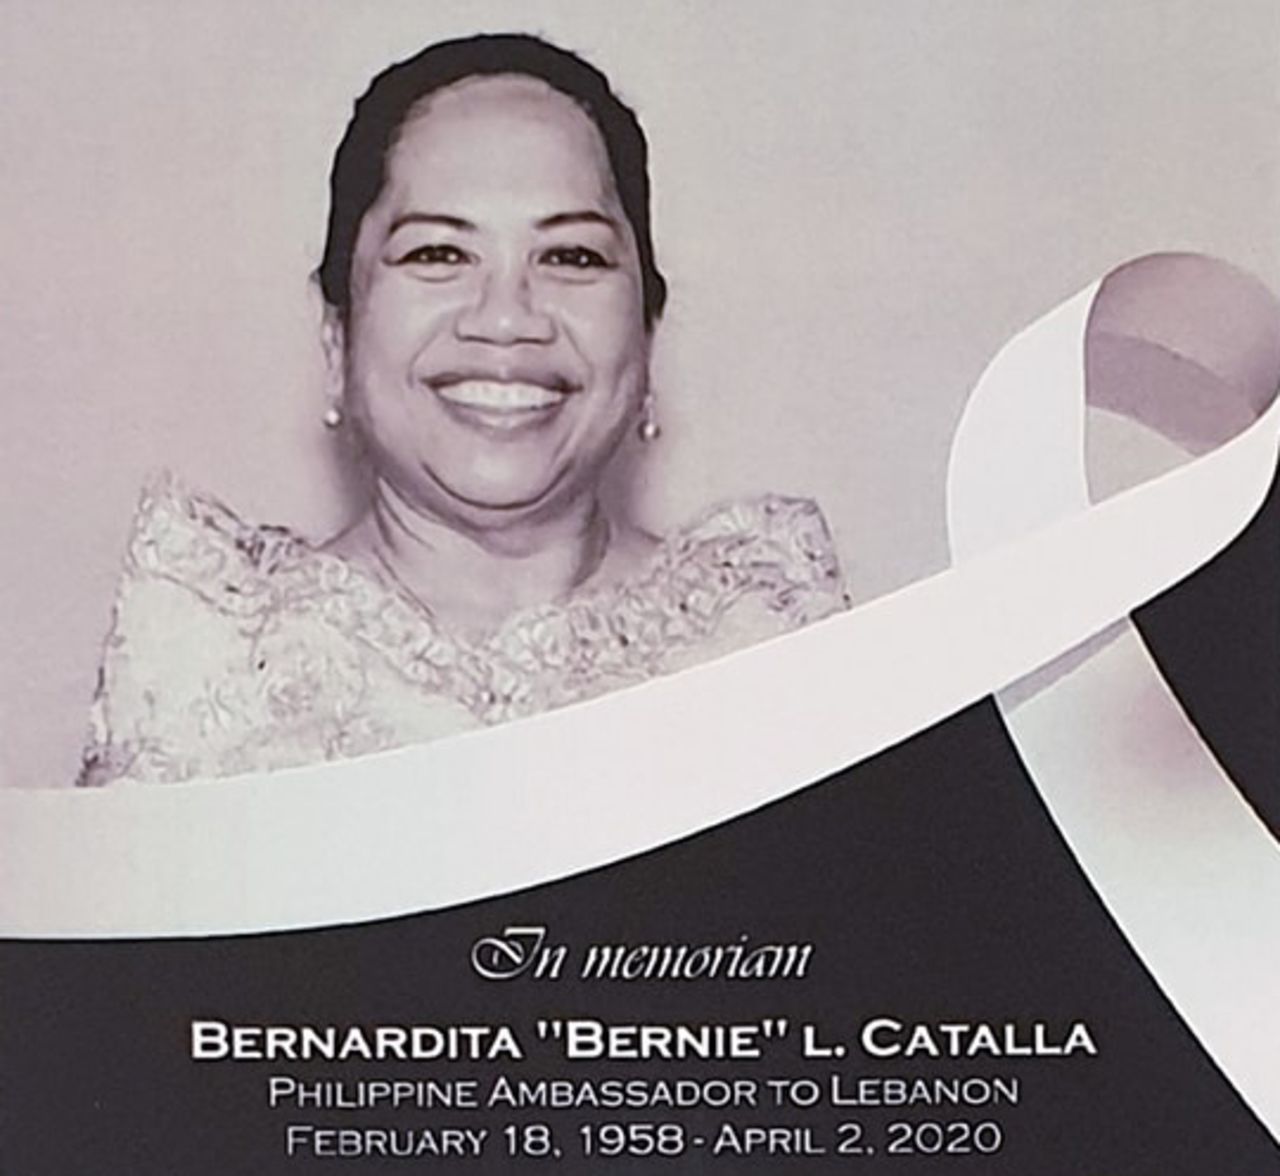 A tribute to Philippine Ambassador to Lebanon Bernardita L. Catalla was posted on the Embassy's Facebook page.